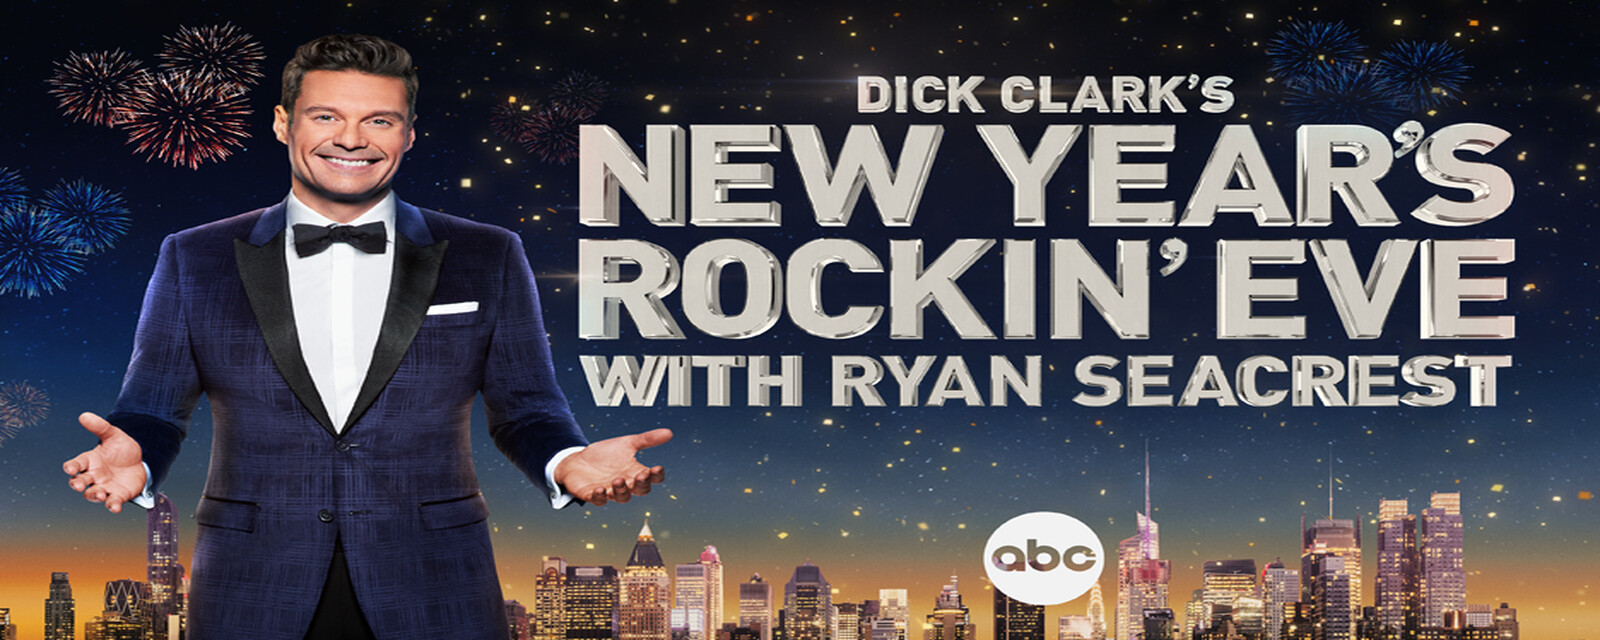 Clark's New Year's Rockin' Eve With Ryan Seacrest 2023′ Returns to Puerto Rico! | Dick Clark's New Year's Rockin' Eve with Ryan Seacrest